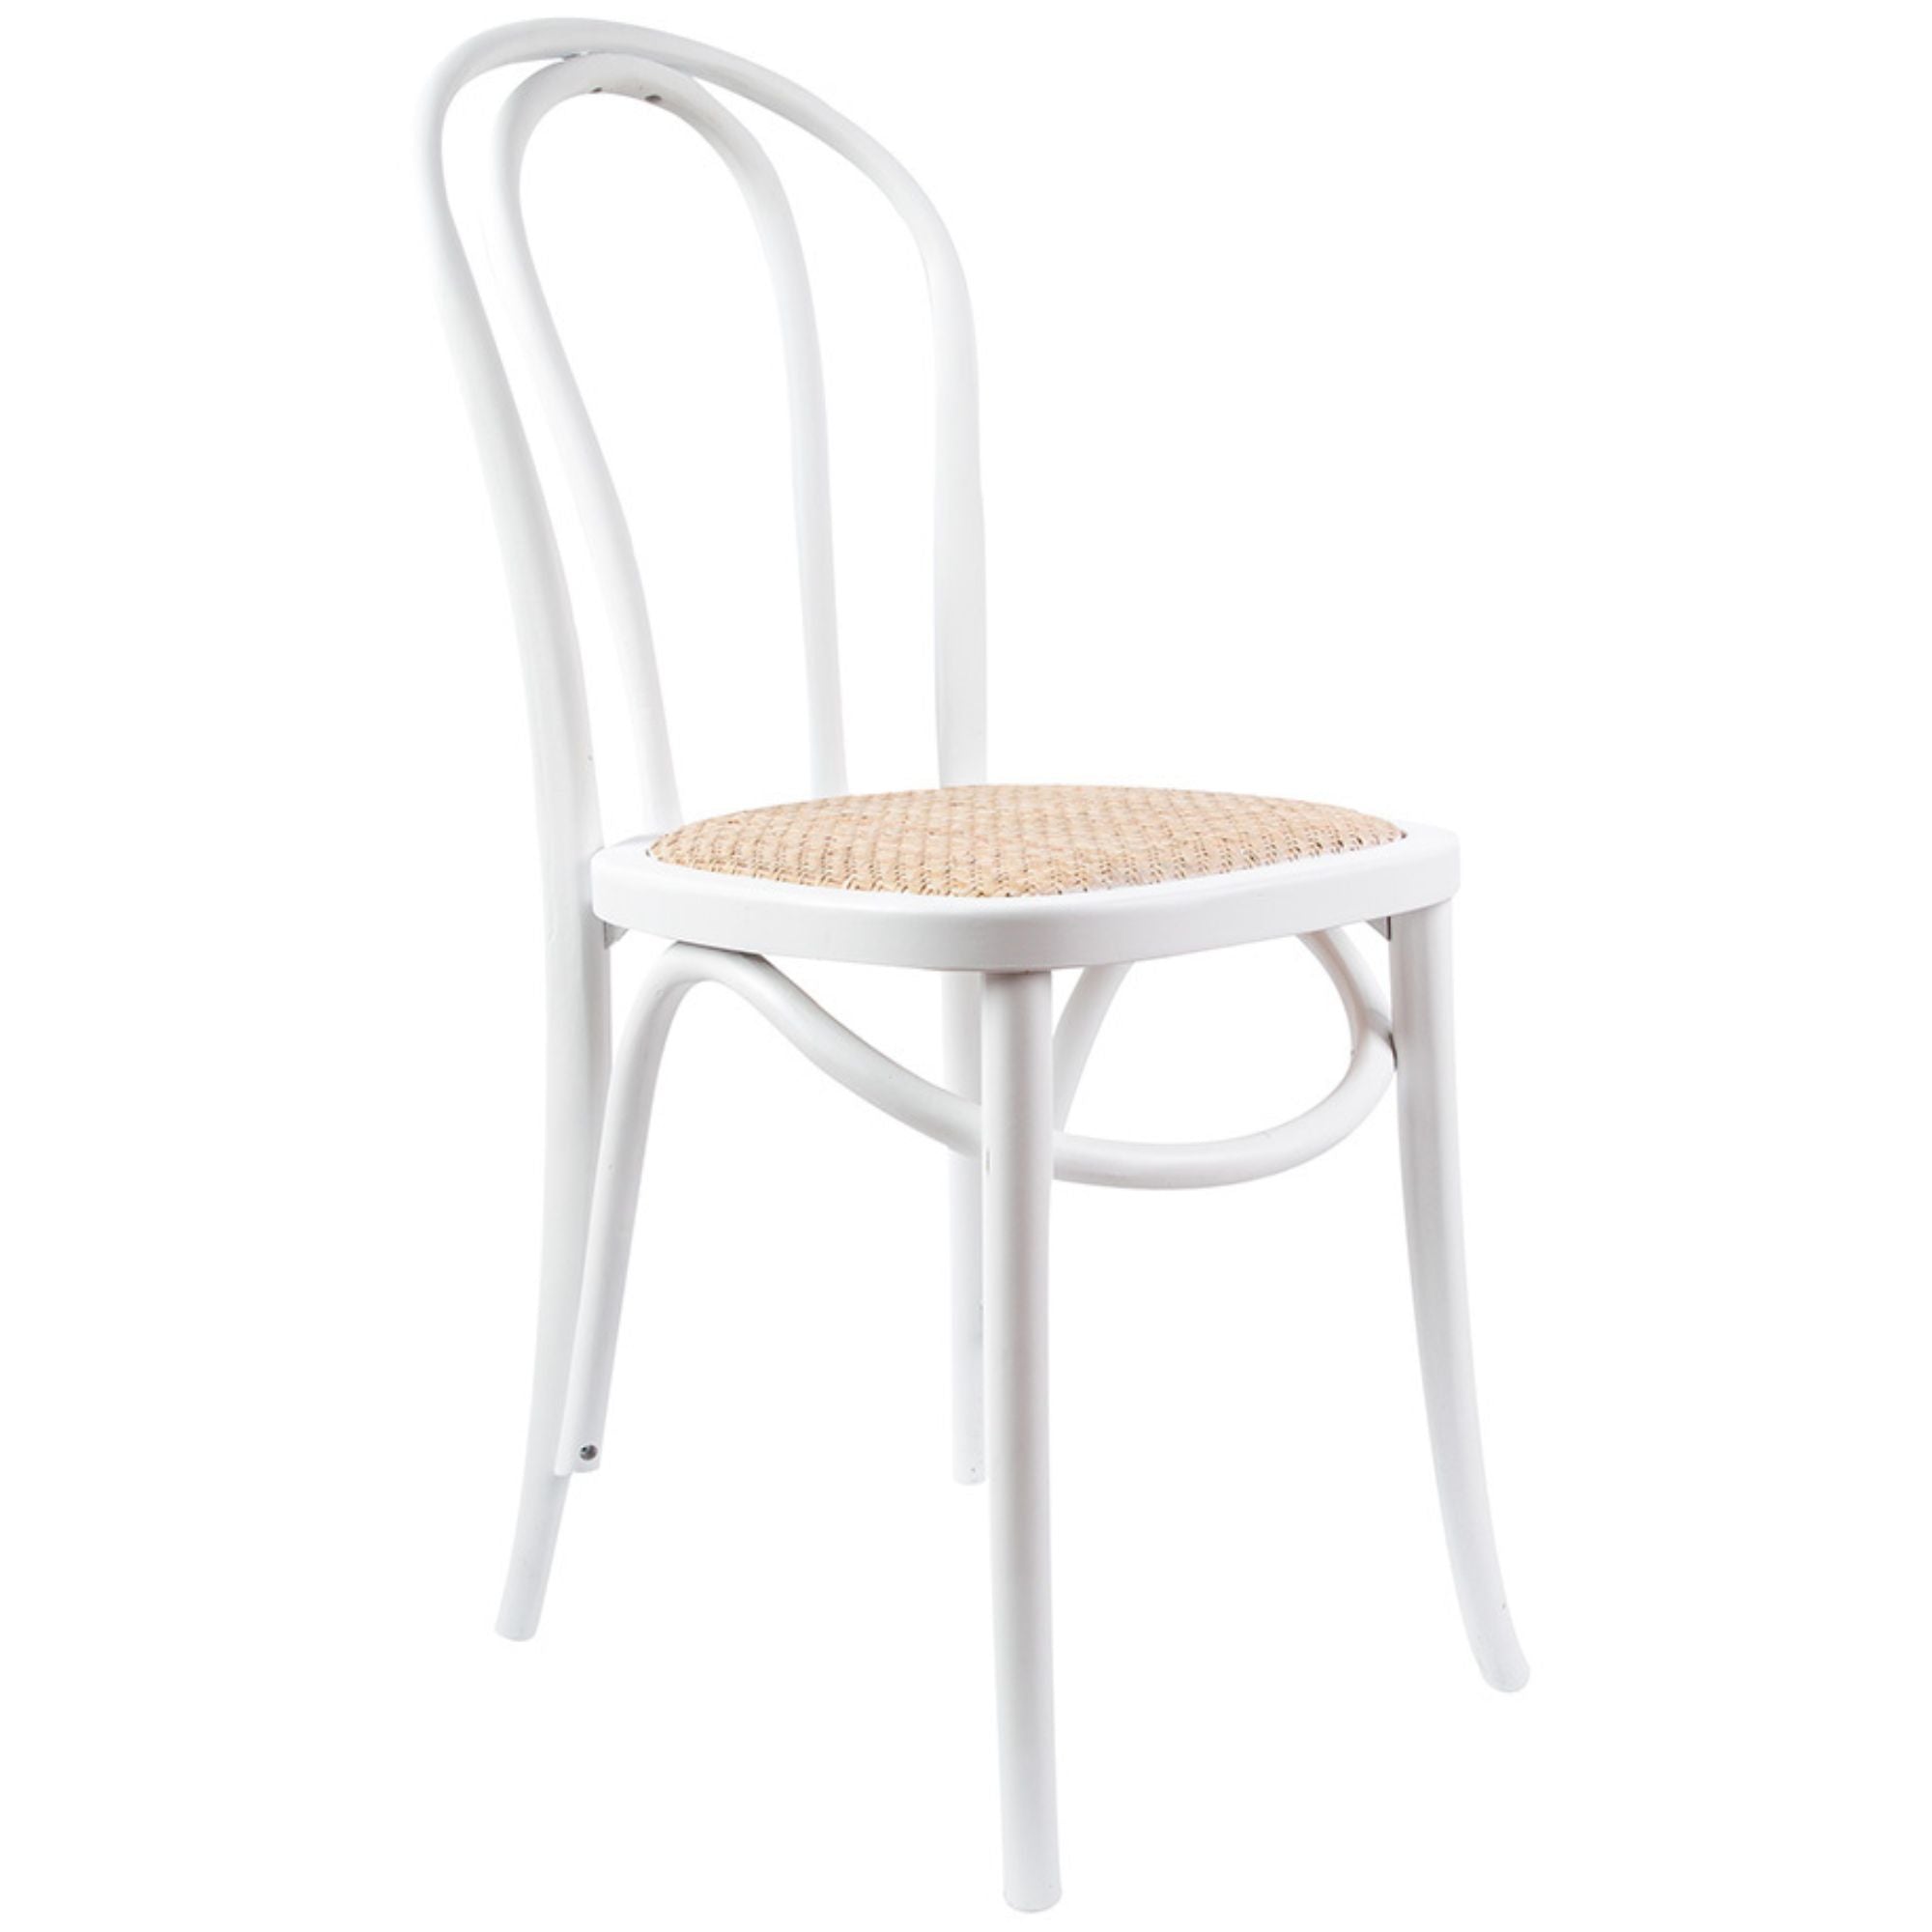 Azalea Arched Back Dining Chair 4 Set Solid Elm Timber Wood Rattan Seat - White Deals499